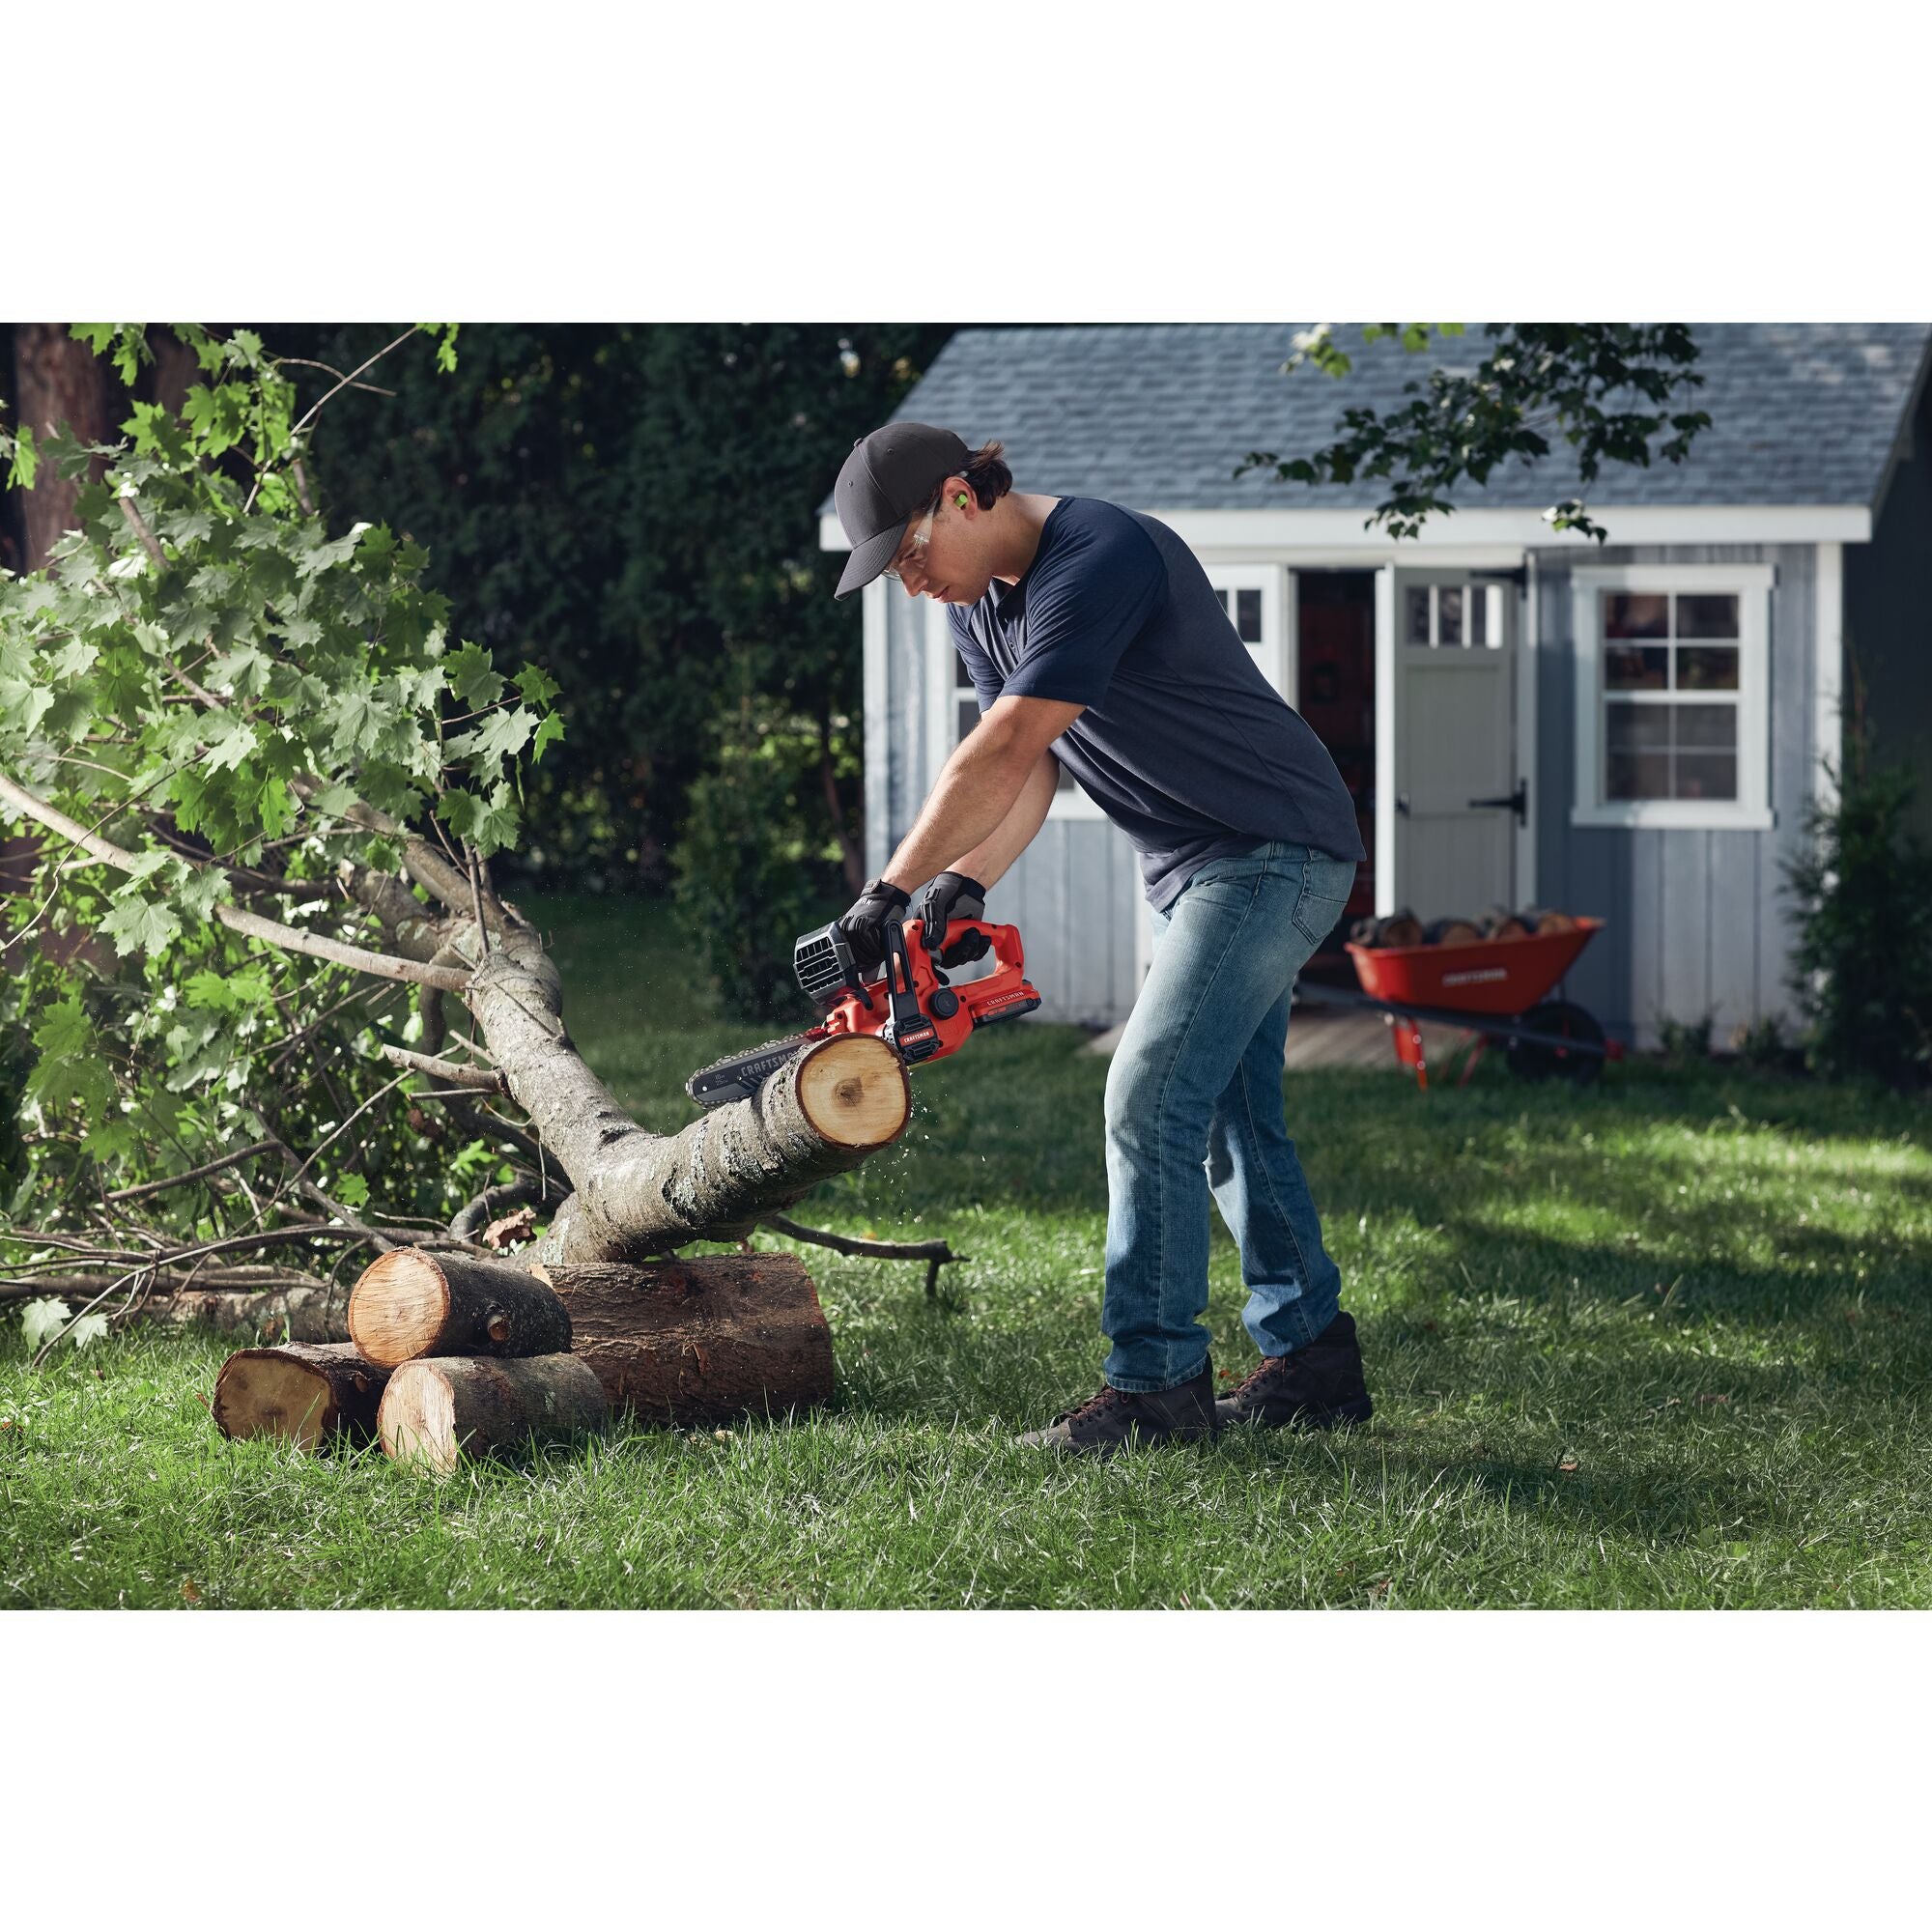 Craftsman CMECS600 16 in. Electric Chainsaw - Ace Hardware